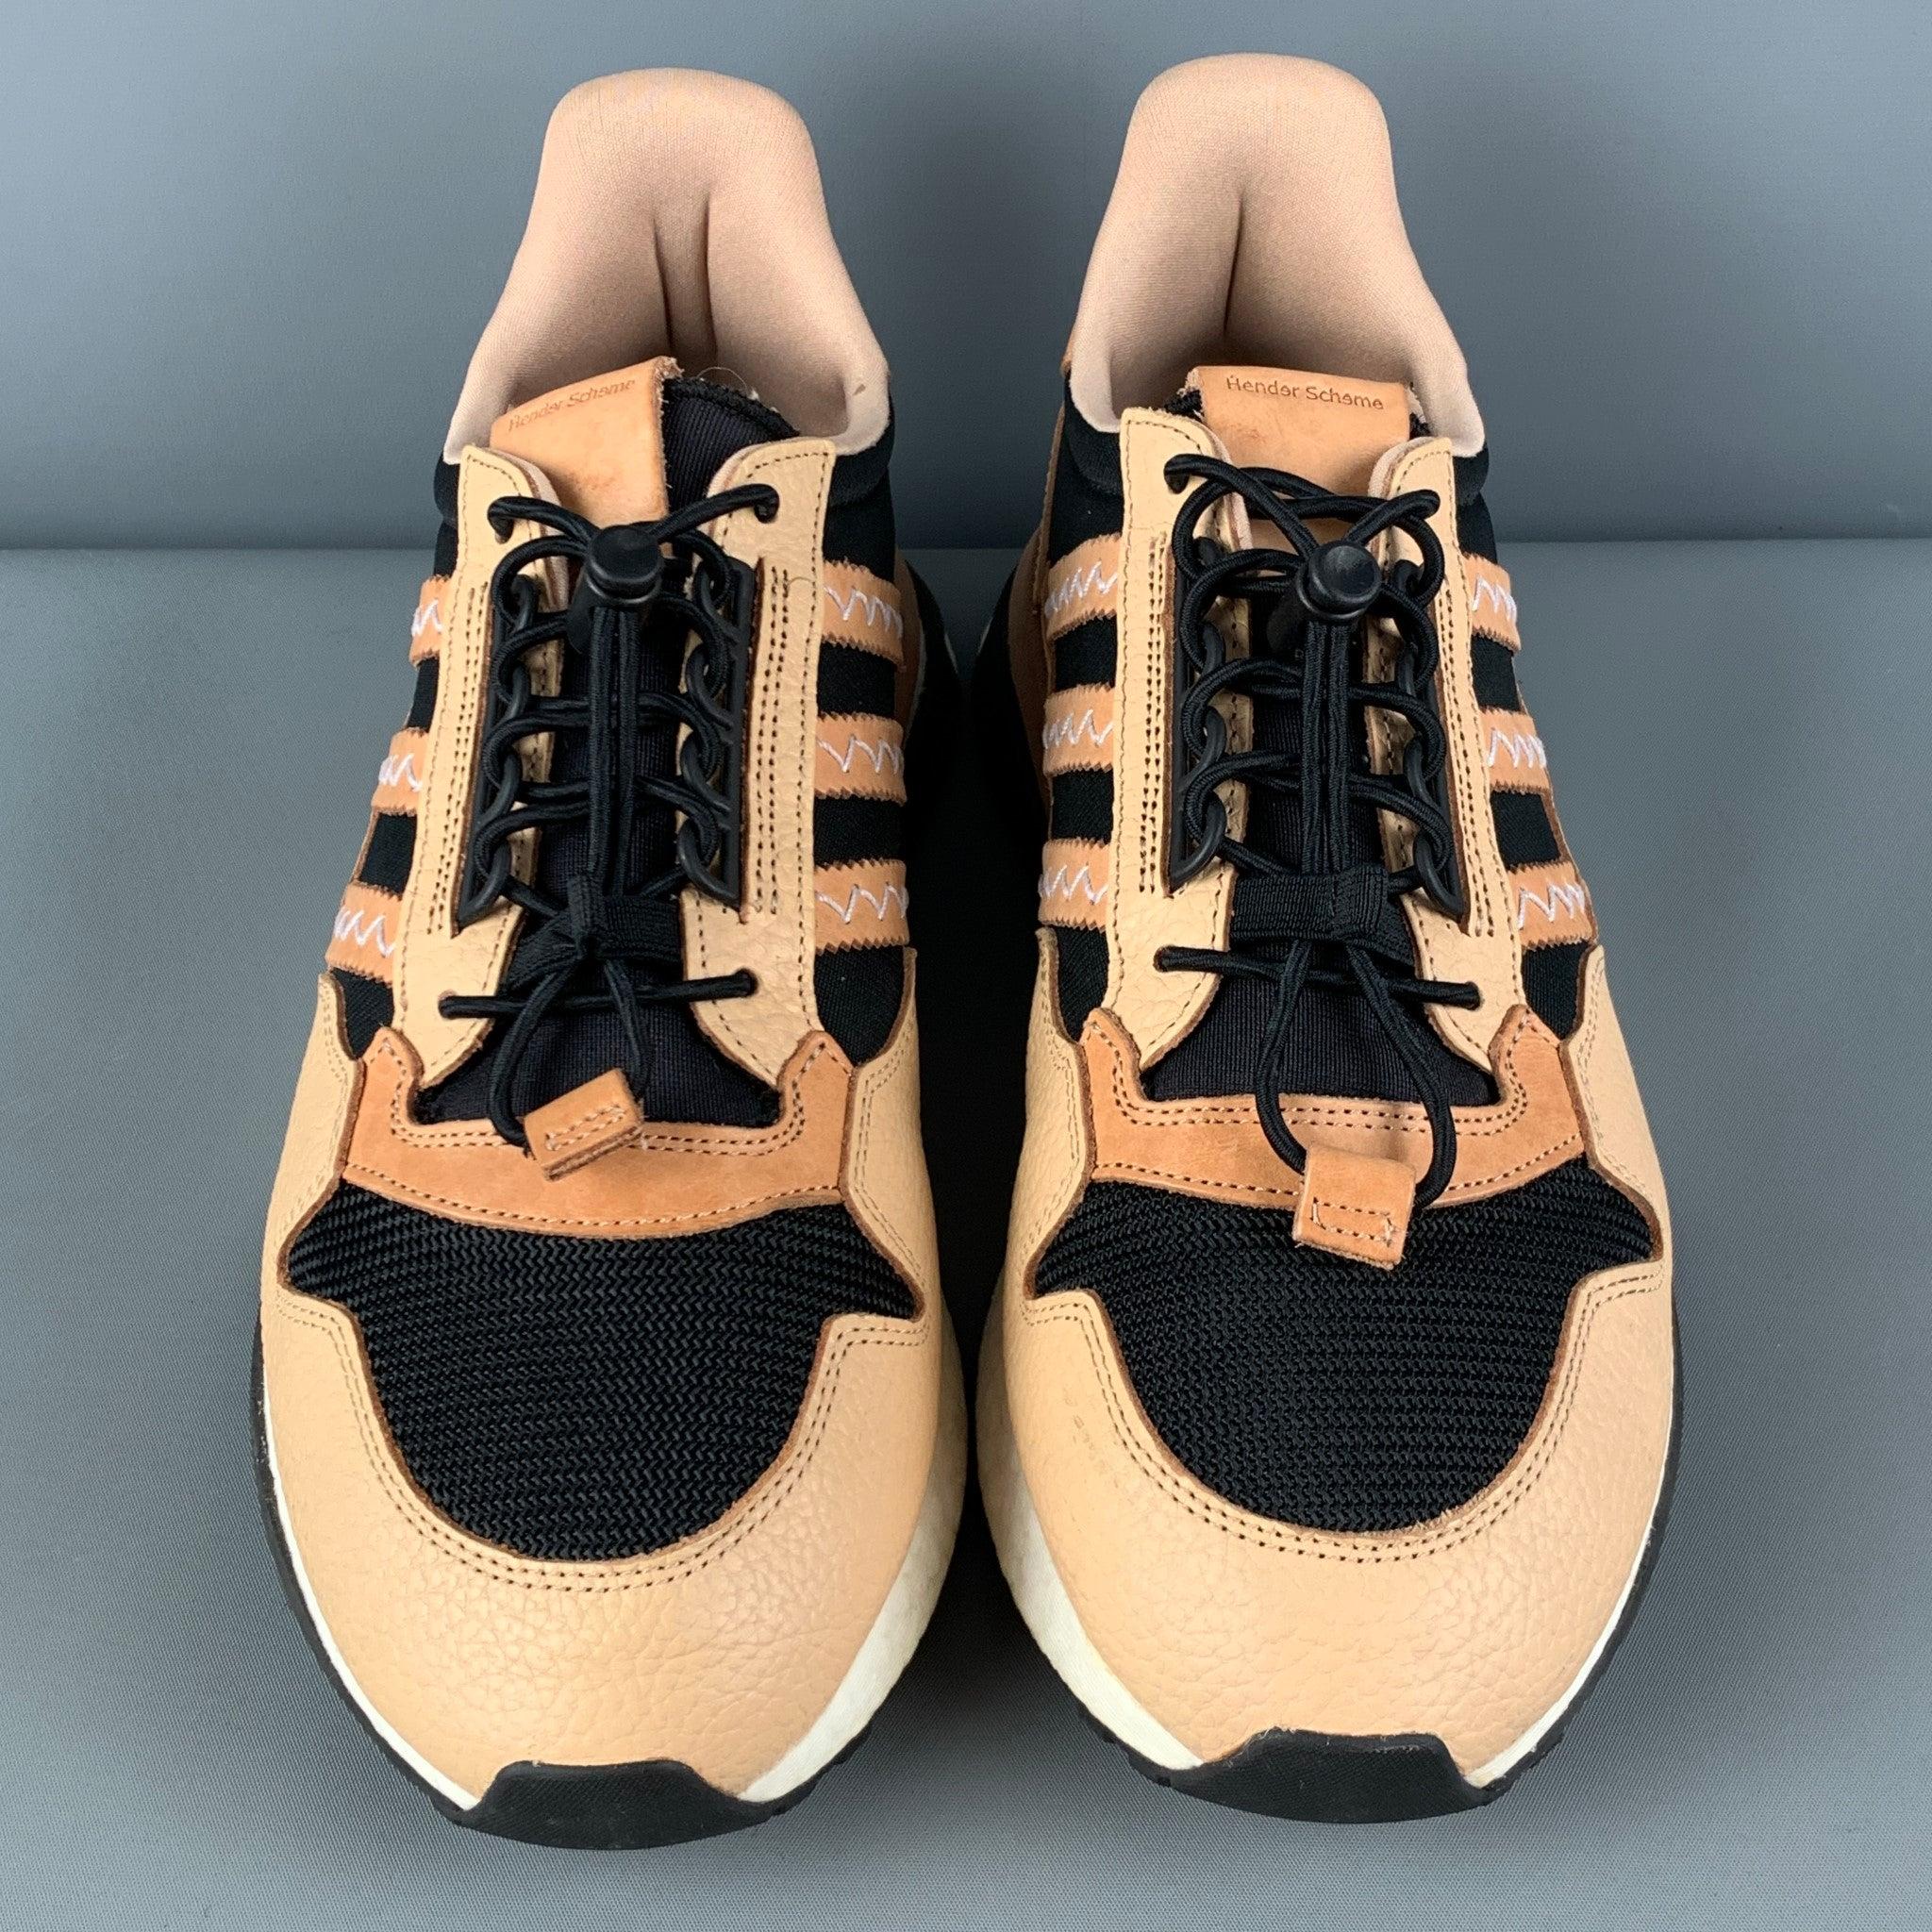 Men's ADIDAS x HENDER SCHEME Size 10.5 Tan Black Leather Lace Up Sneakers For Sale